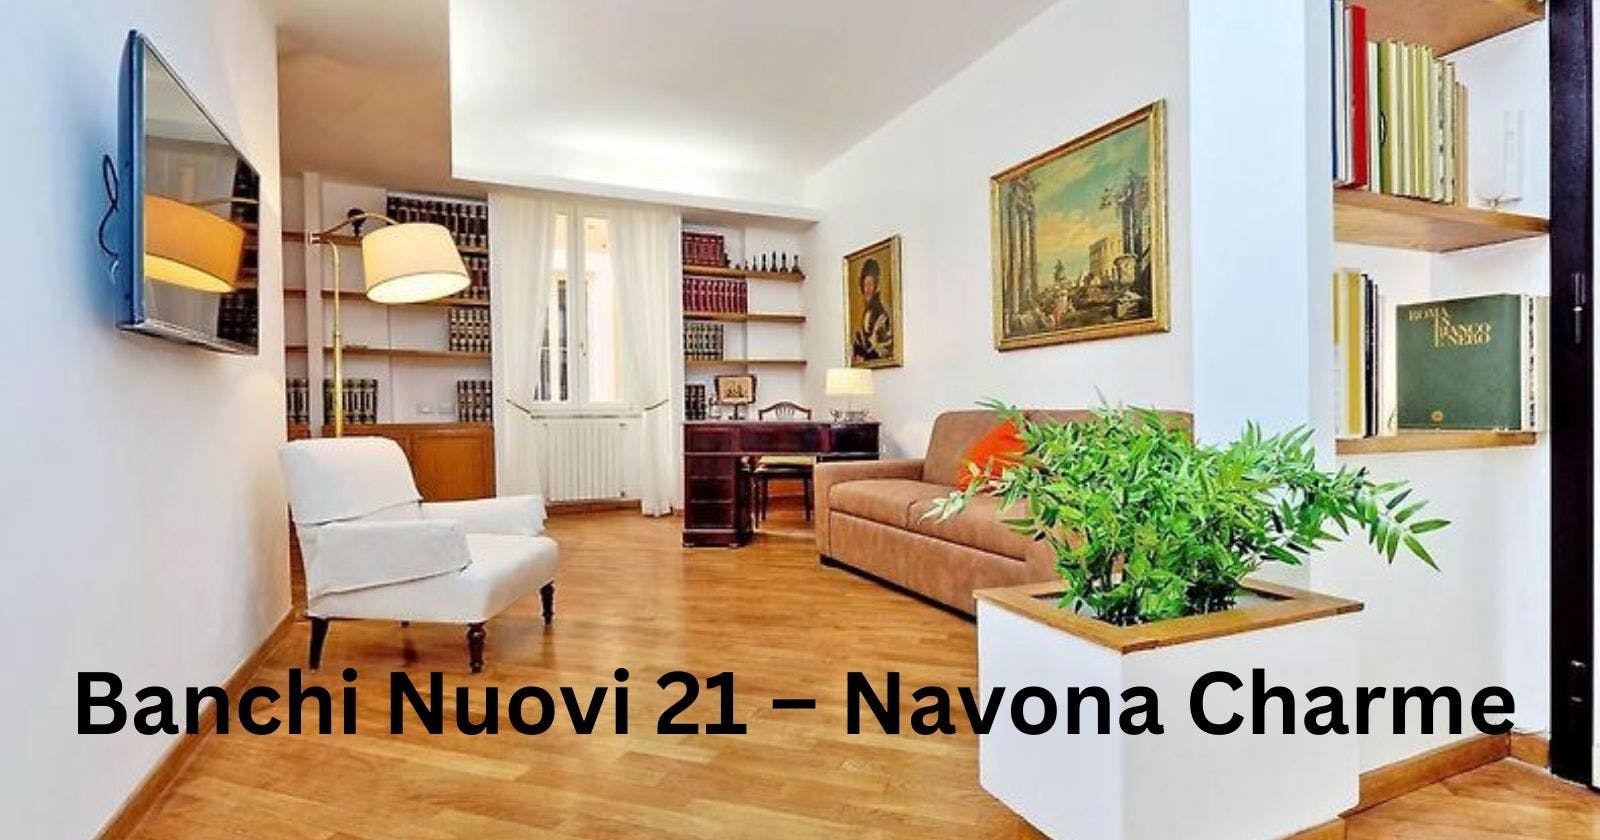 Some Significant Features of Banchi Nuovi 21: Student Housing Property in Rome